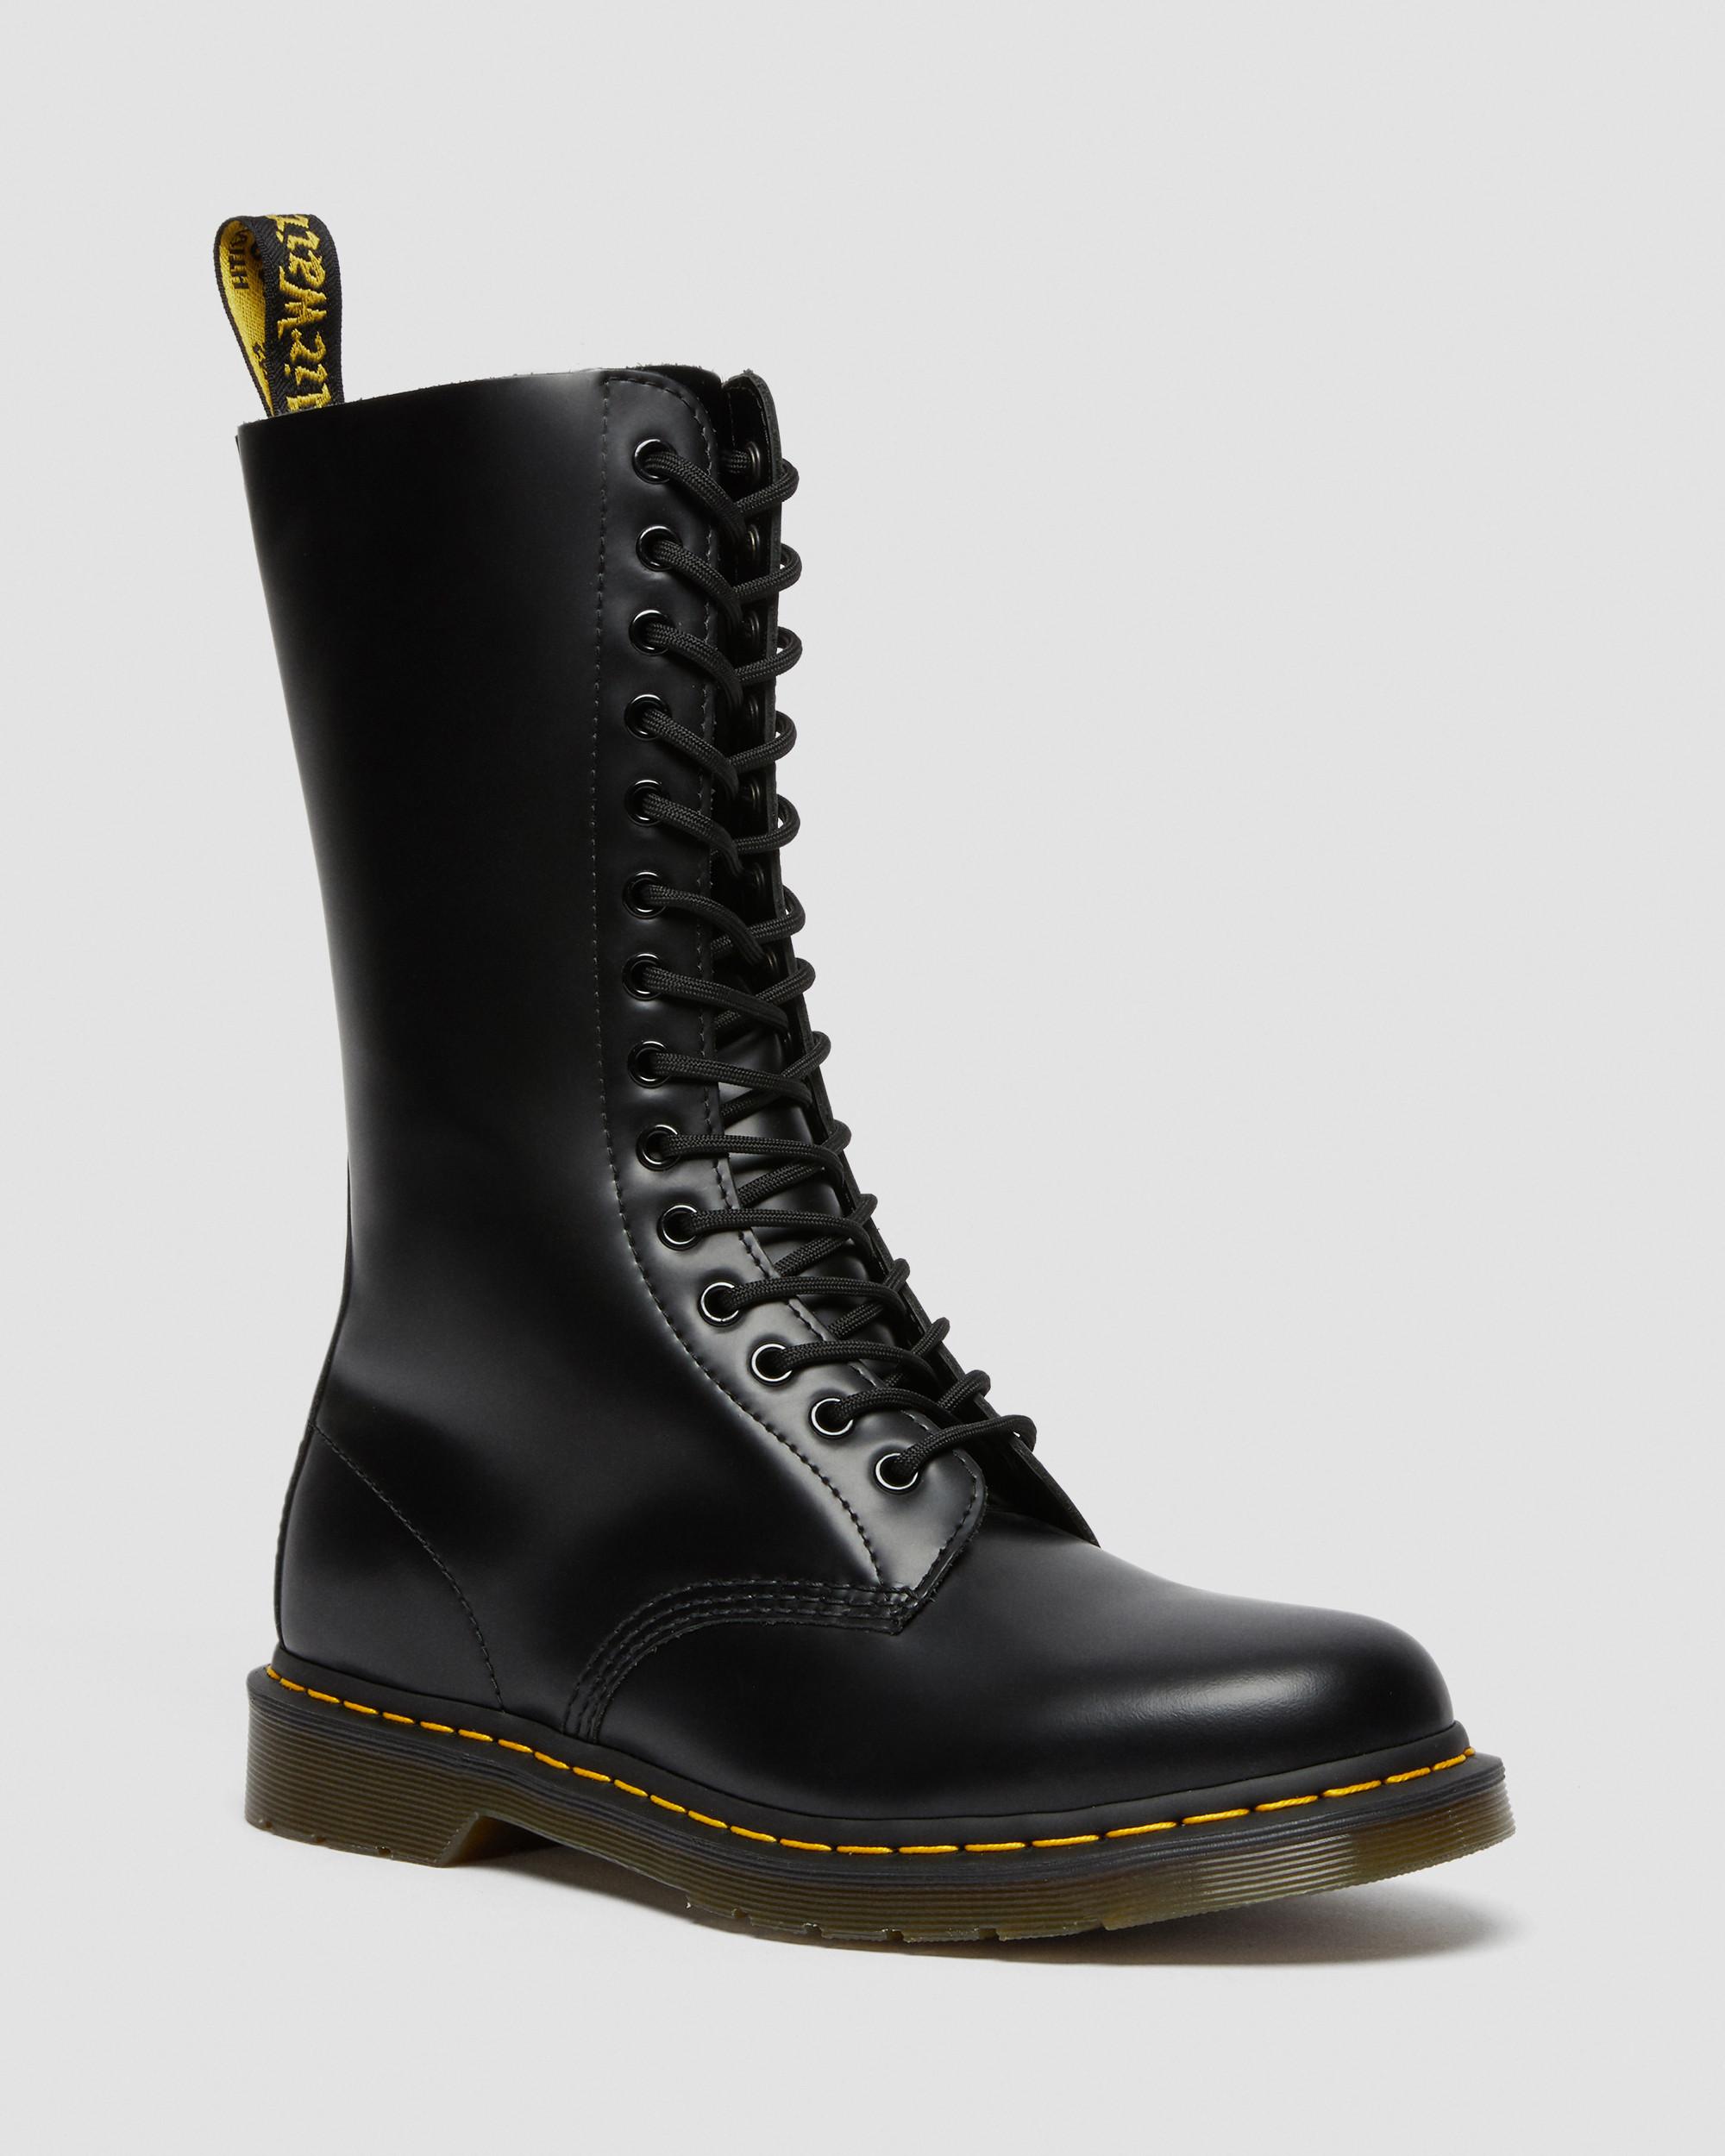 7 Ways to Wear Combat Boots in 2021 - Personal Stylist Tips - One Of A Style